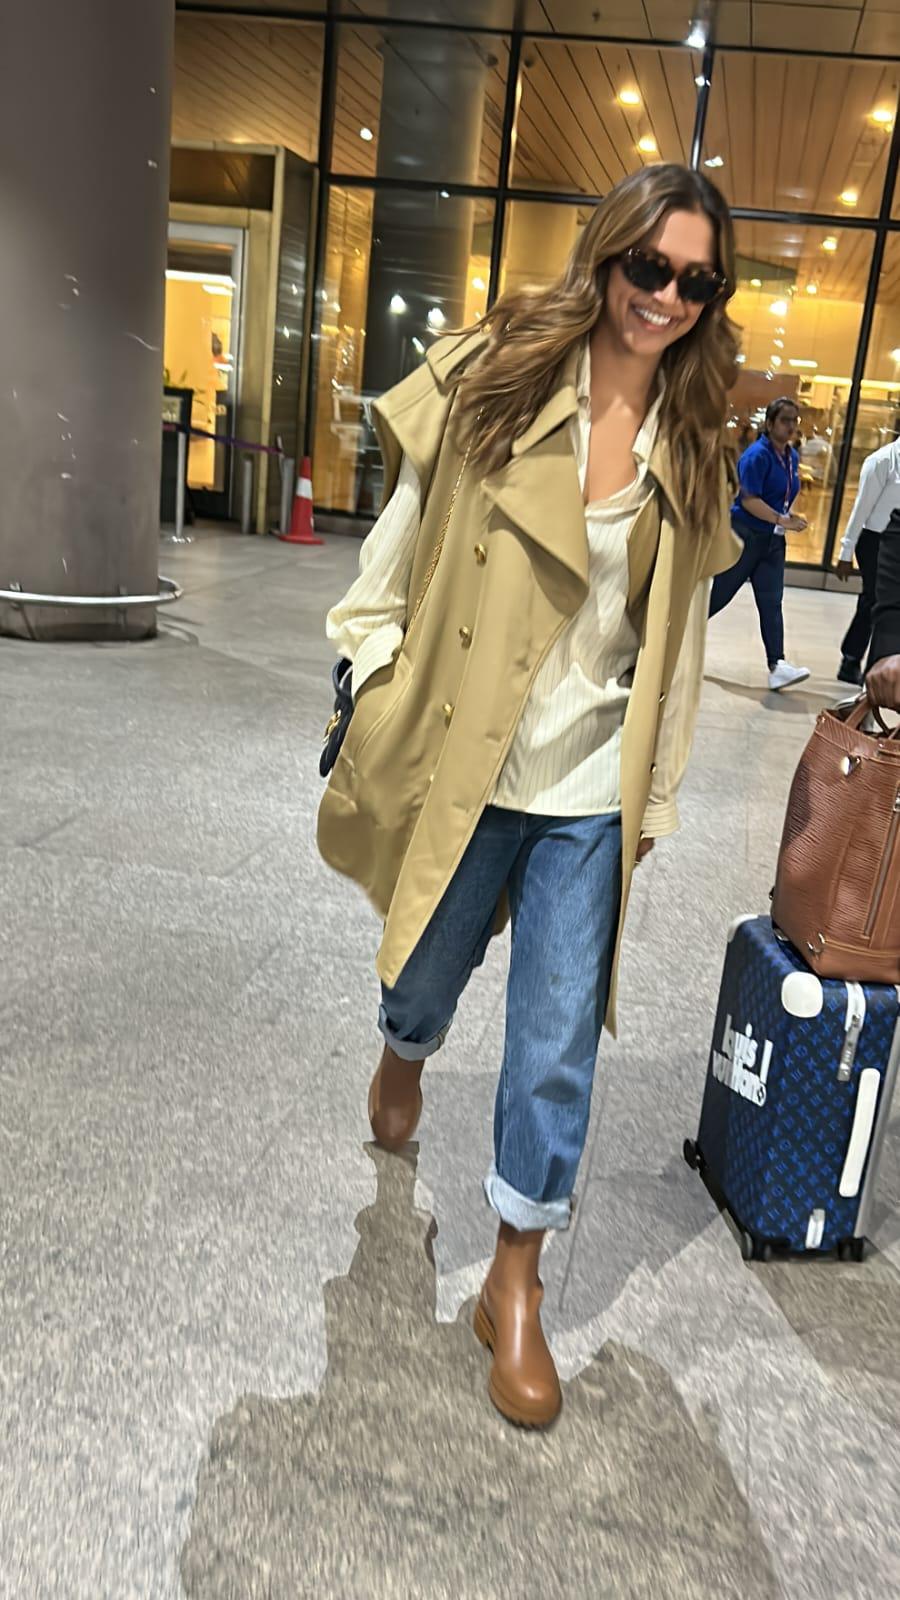 The actress never fails to stun. She looked her best, elevating airport fashion to a whole new level